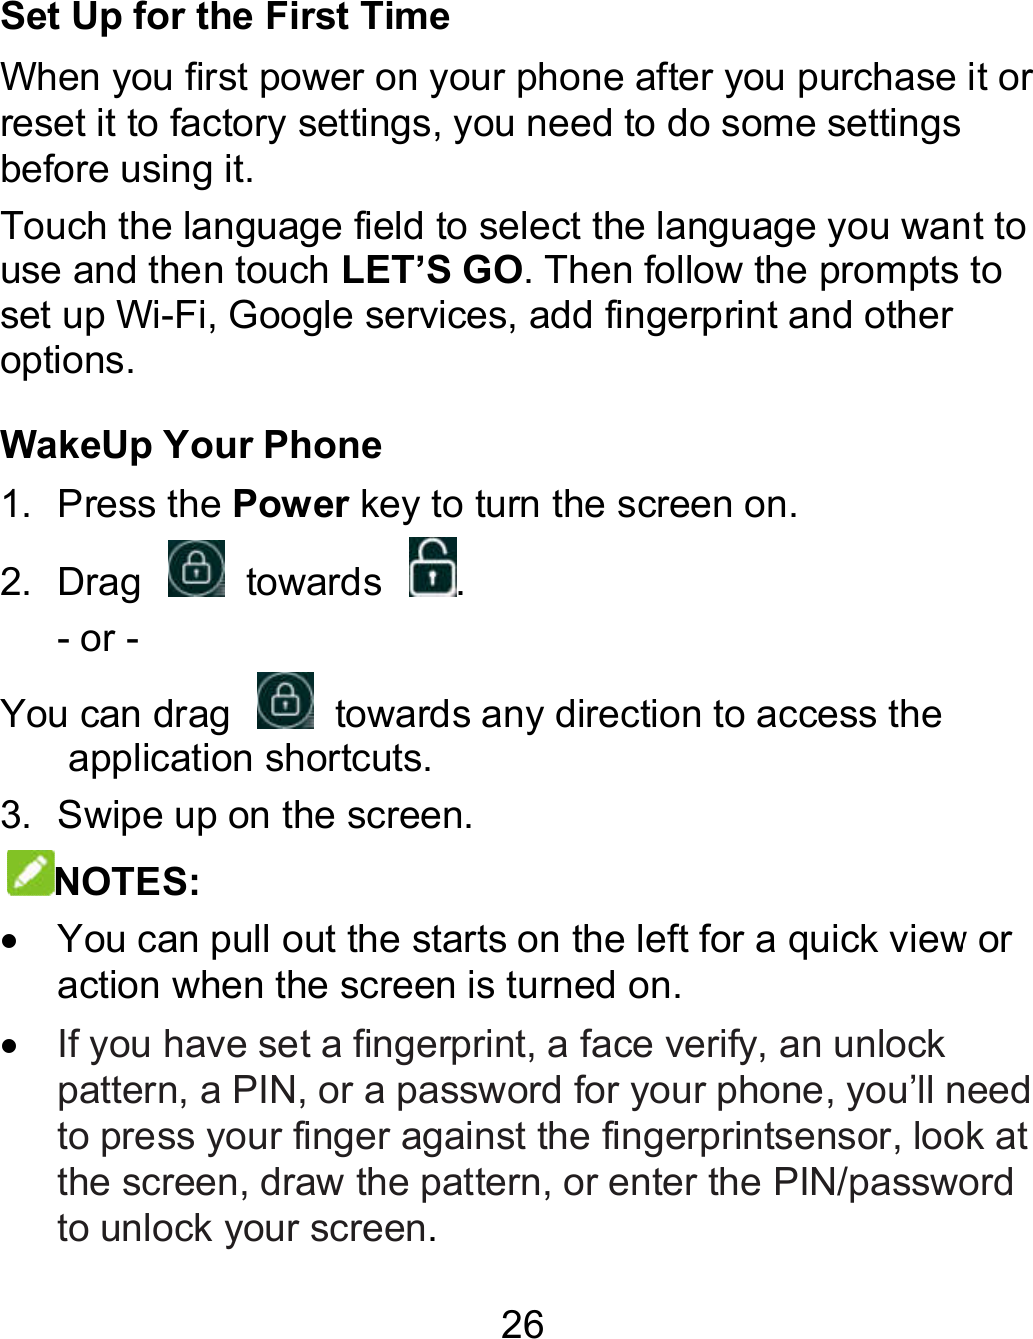 26 Set Up for the First Time When you first power on your phone after you purchase it or reset it to factory settings, you need to do some settings before using it. Touch the language field to select the language you want to use and then touch LET’S GO. Then follow the prompts to set up Wi-Fi, Google services, add fingerprint and other options. WakeUp Your Phone 1.  Press the Power key to turn the screen on. 2.  Drag    towards  . - or - You can drag    towards any direction to access the application shortcuts. 3.  Swipe up on the screen. NOTES:    You can pull out the starts on the left for a quick view or action when the screen is turned on.  If you have set a fingerprint, a face verify, an unlock pattern, a PIN, or a password for your phone, you’ll need to press your finger against the fingerprintsensor, look at the screen, draw the pattern, or enter the PIN/password to unlock your screen. When you first power on your phone after you purchase it or it to factory settings, you need to do some settings Touch the language field to select the language you want to . Then follow the prompts to Fi, Google services, add fingerprint and other You can pull out the starts on the left for a quick view or pattern, a PIN, or a password for your phone, you’ll need look at ord 